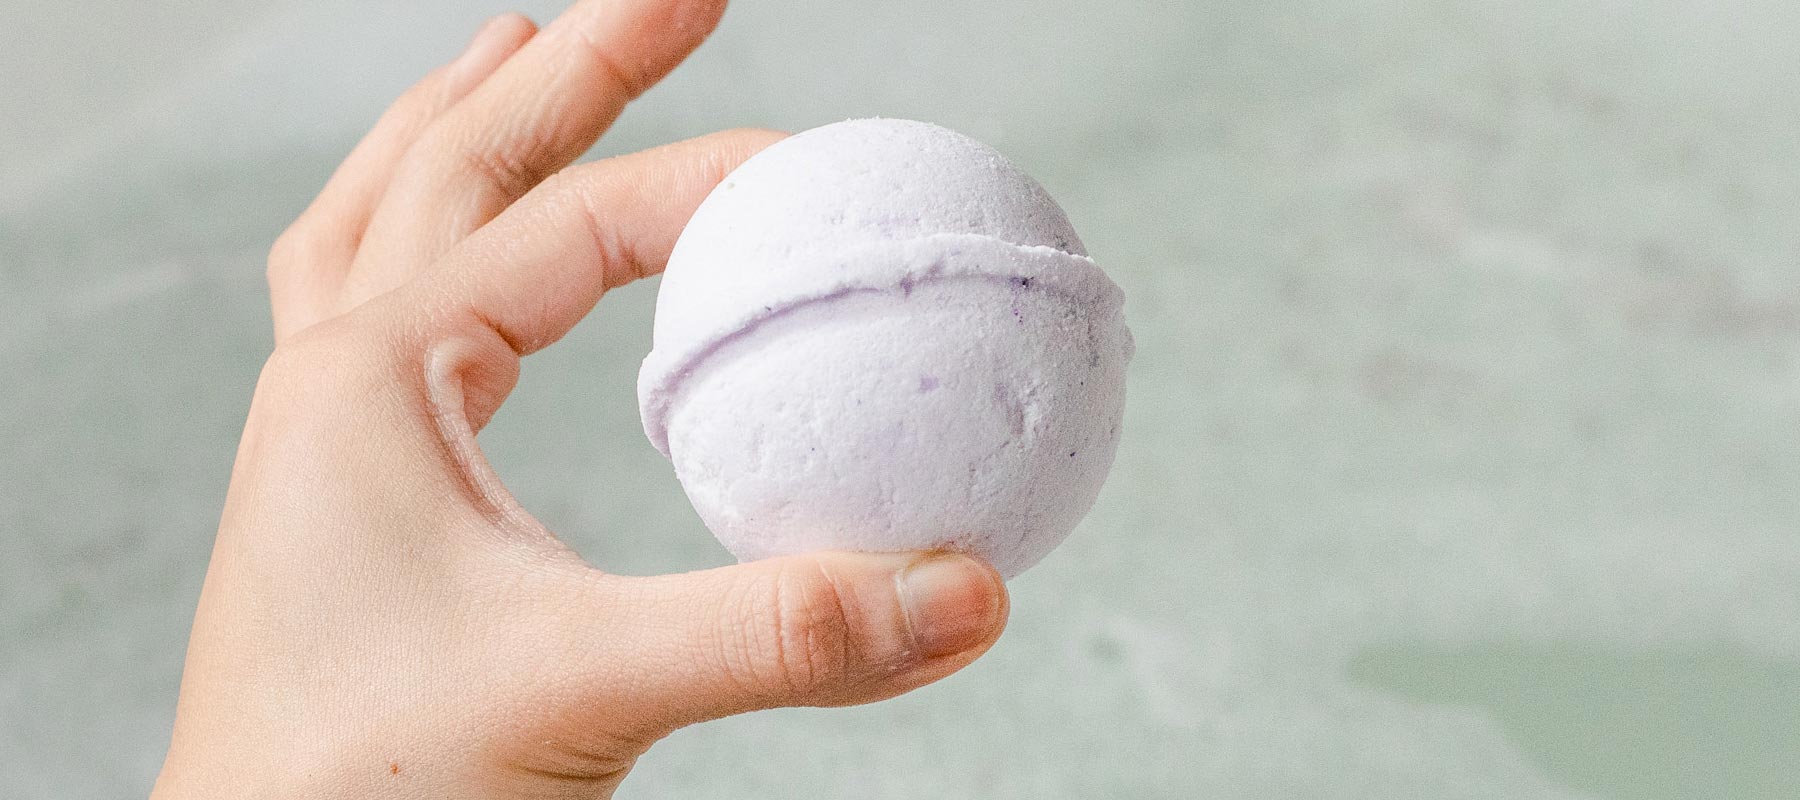 A person's hand holds a white bath bomb between thumb and forefinger, over top of a bath full of water.